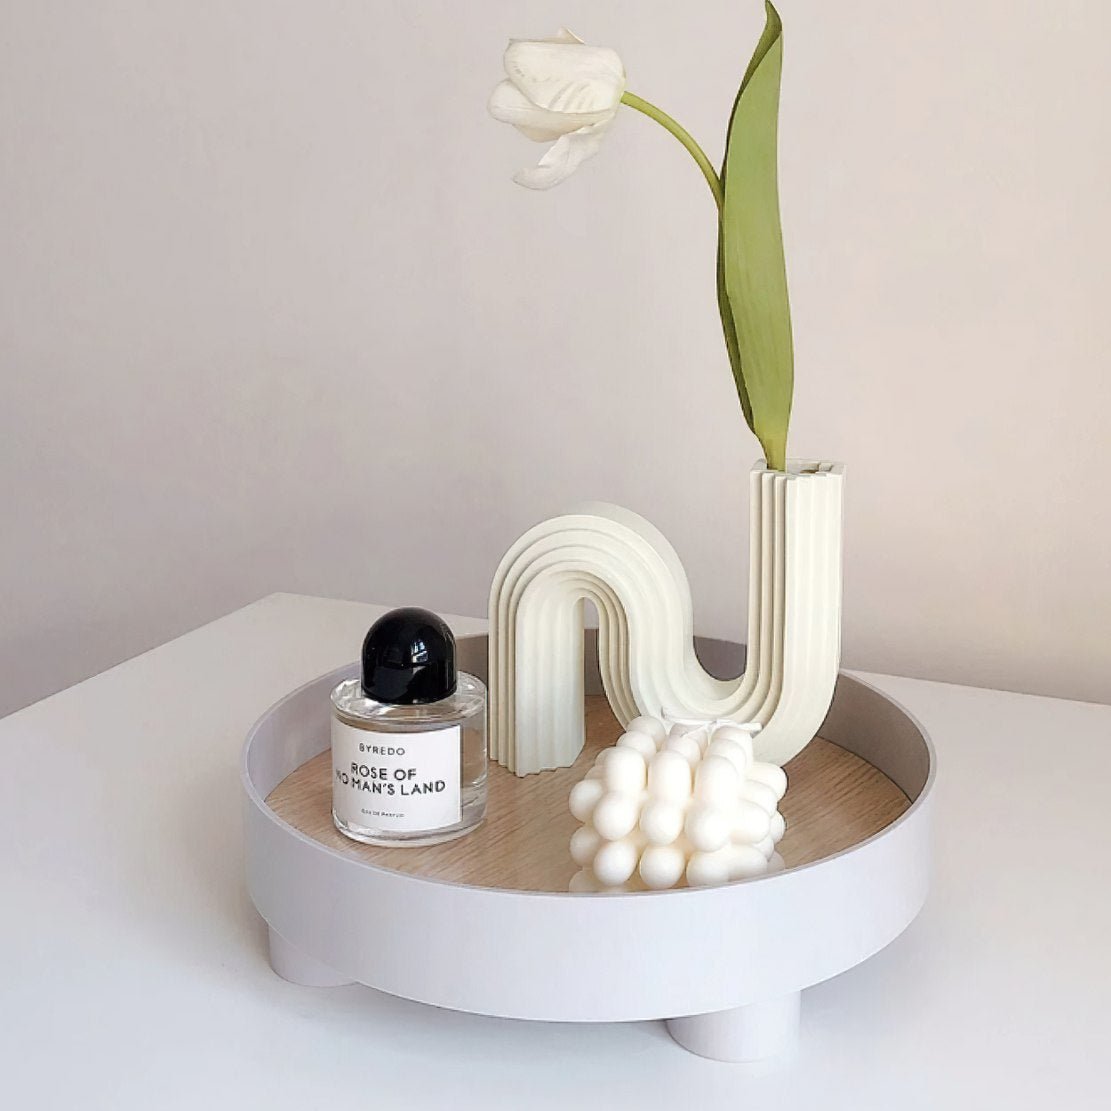 Nordic decorative elevated round storage tray, holding a perfume, a flower vase and white candle